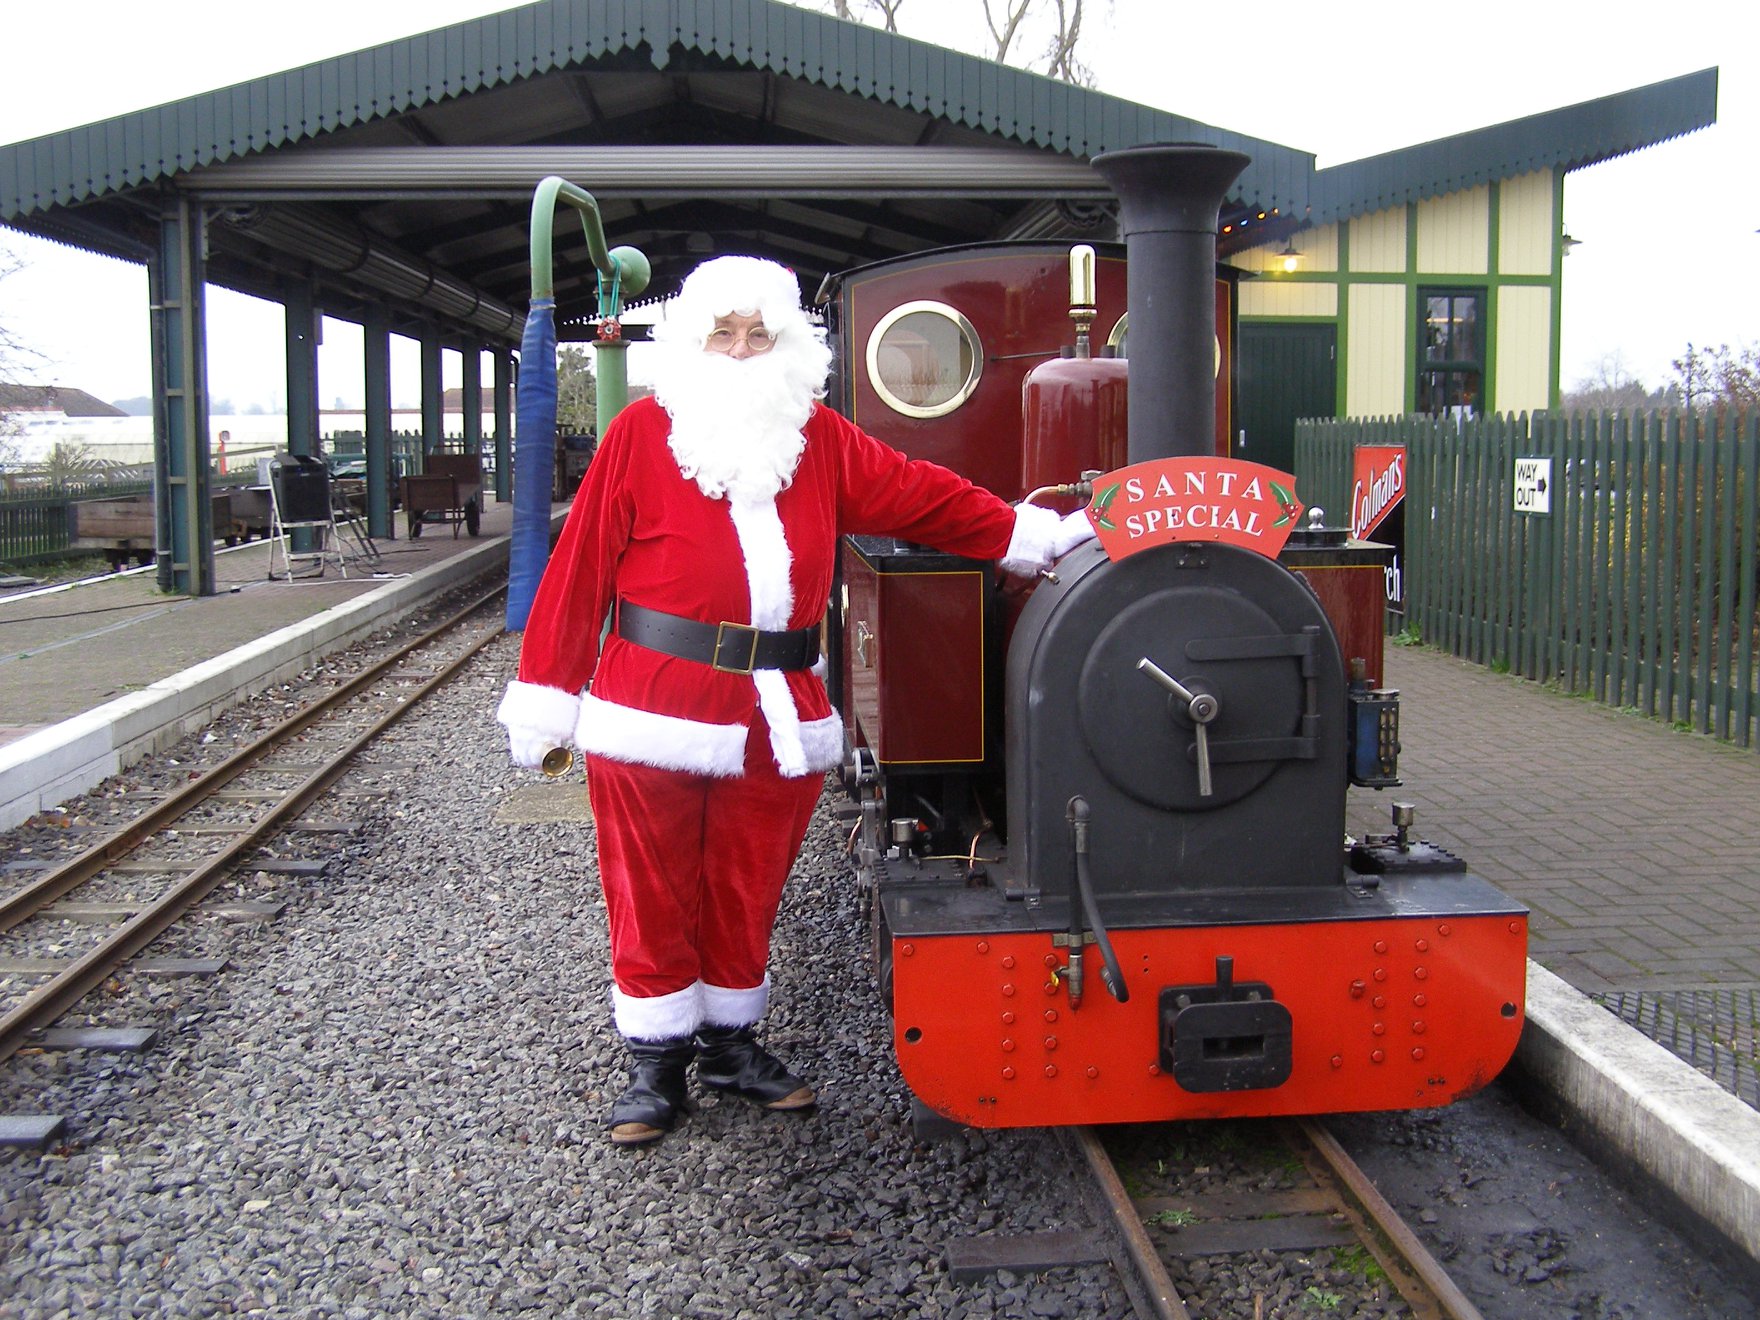 73 Santa Trains Journeys to Experience in 2021